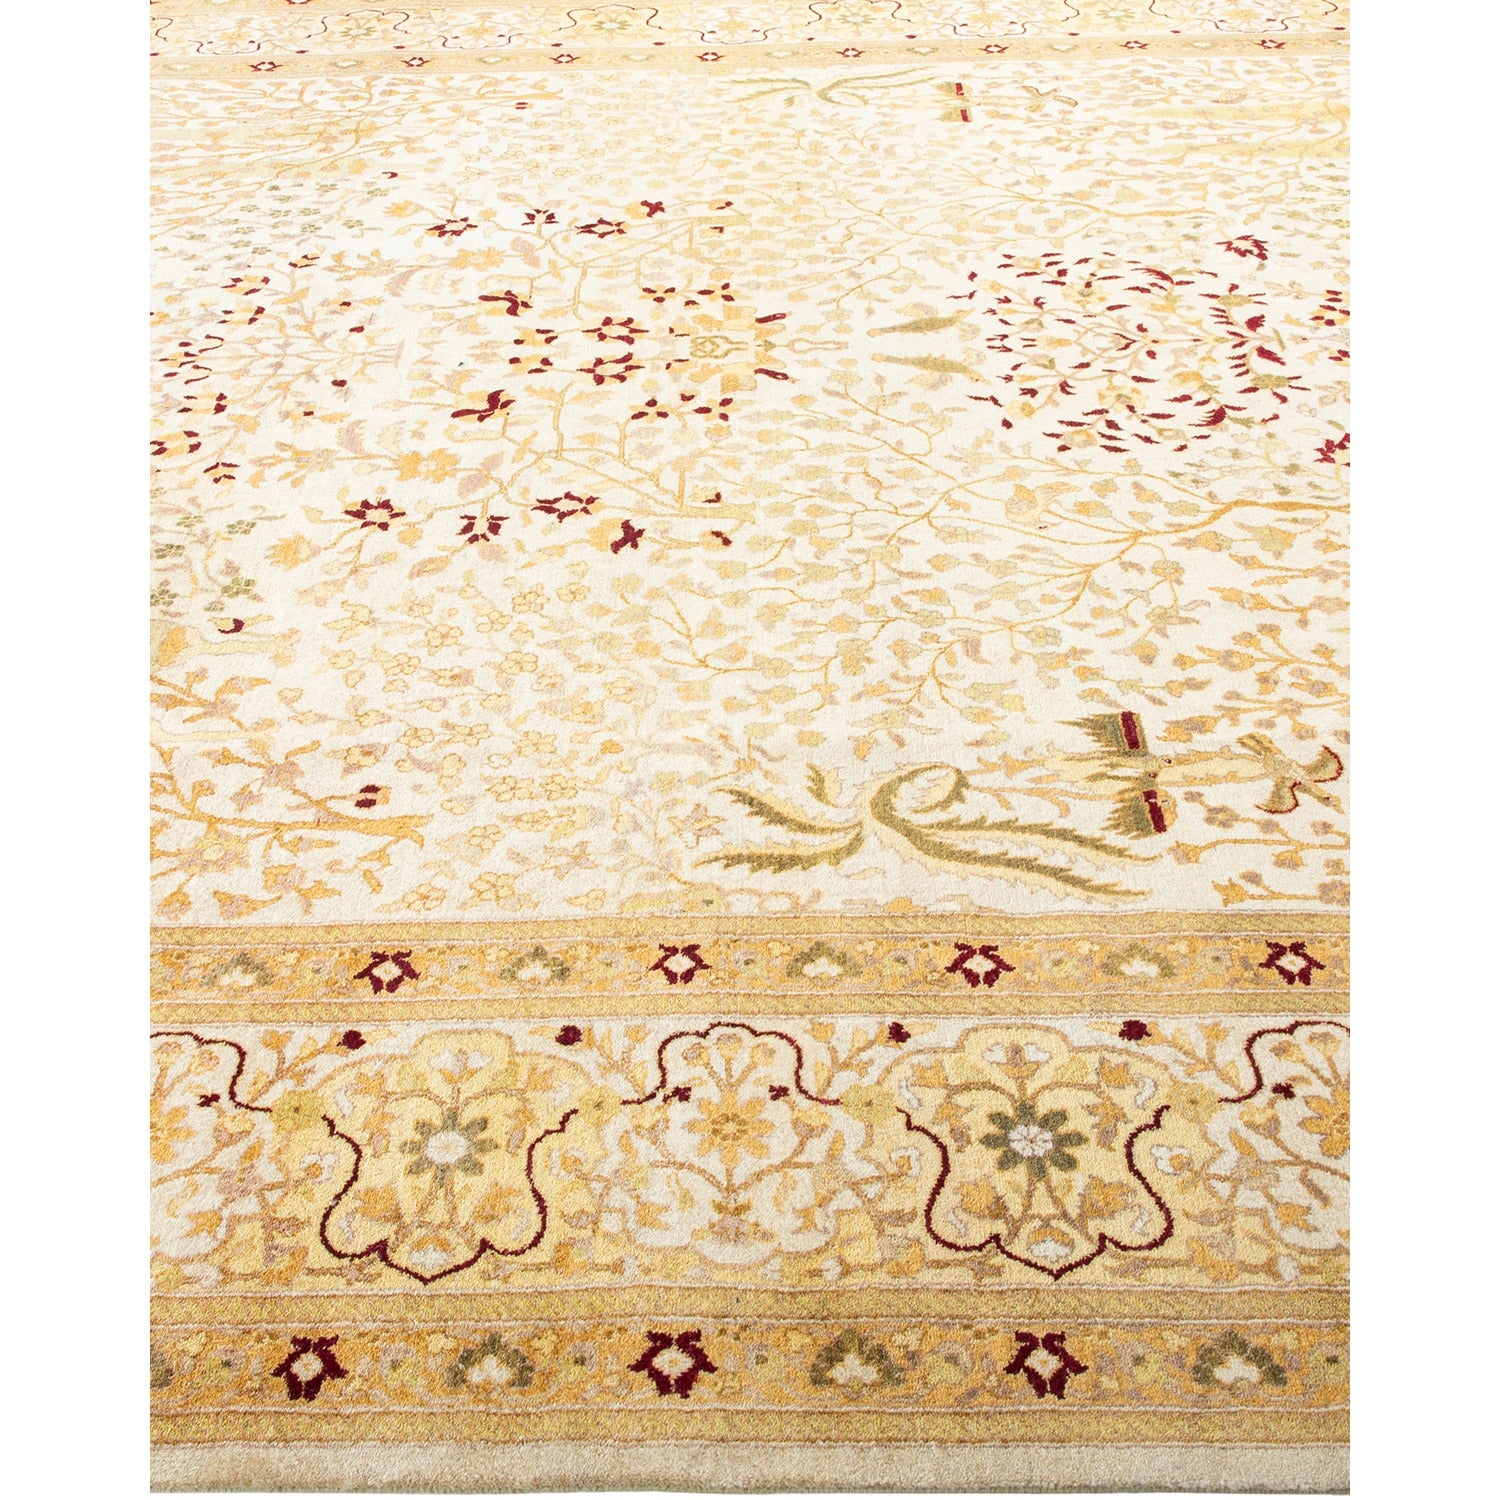 Stunning decorative area rug with intricate design and vibrant colors.